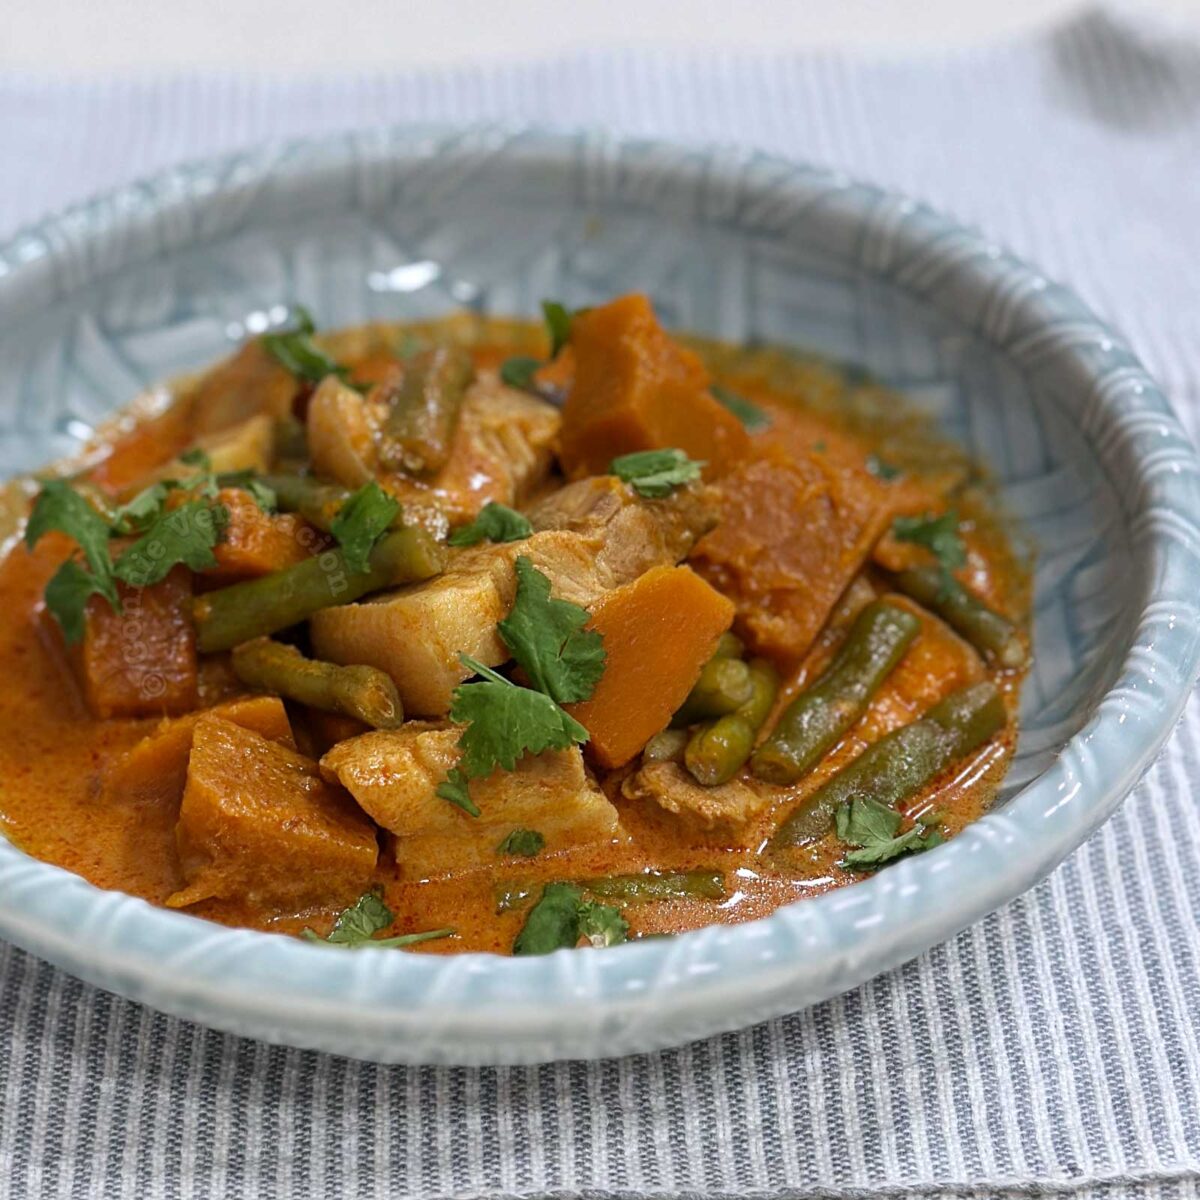 Phuketian heritage curry with pork and vegetables